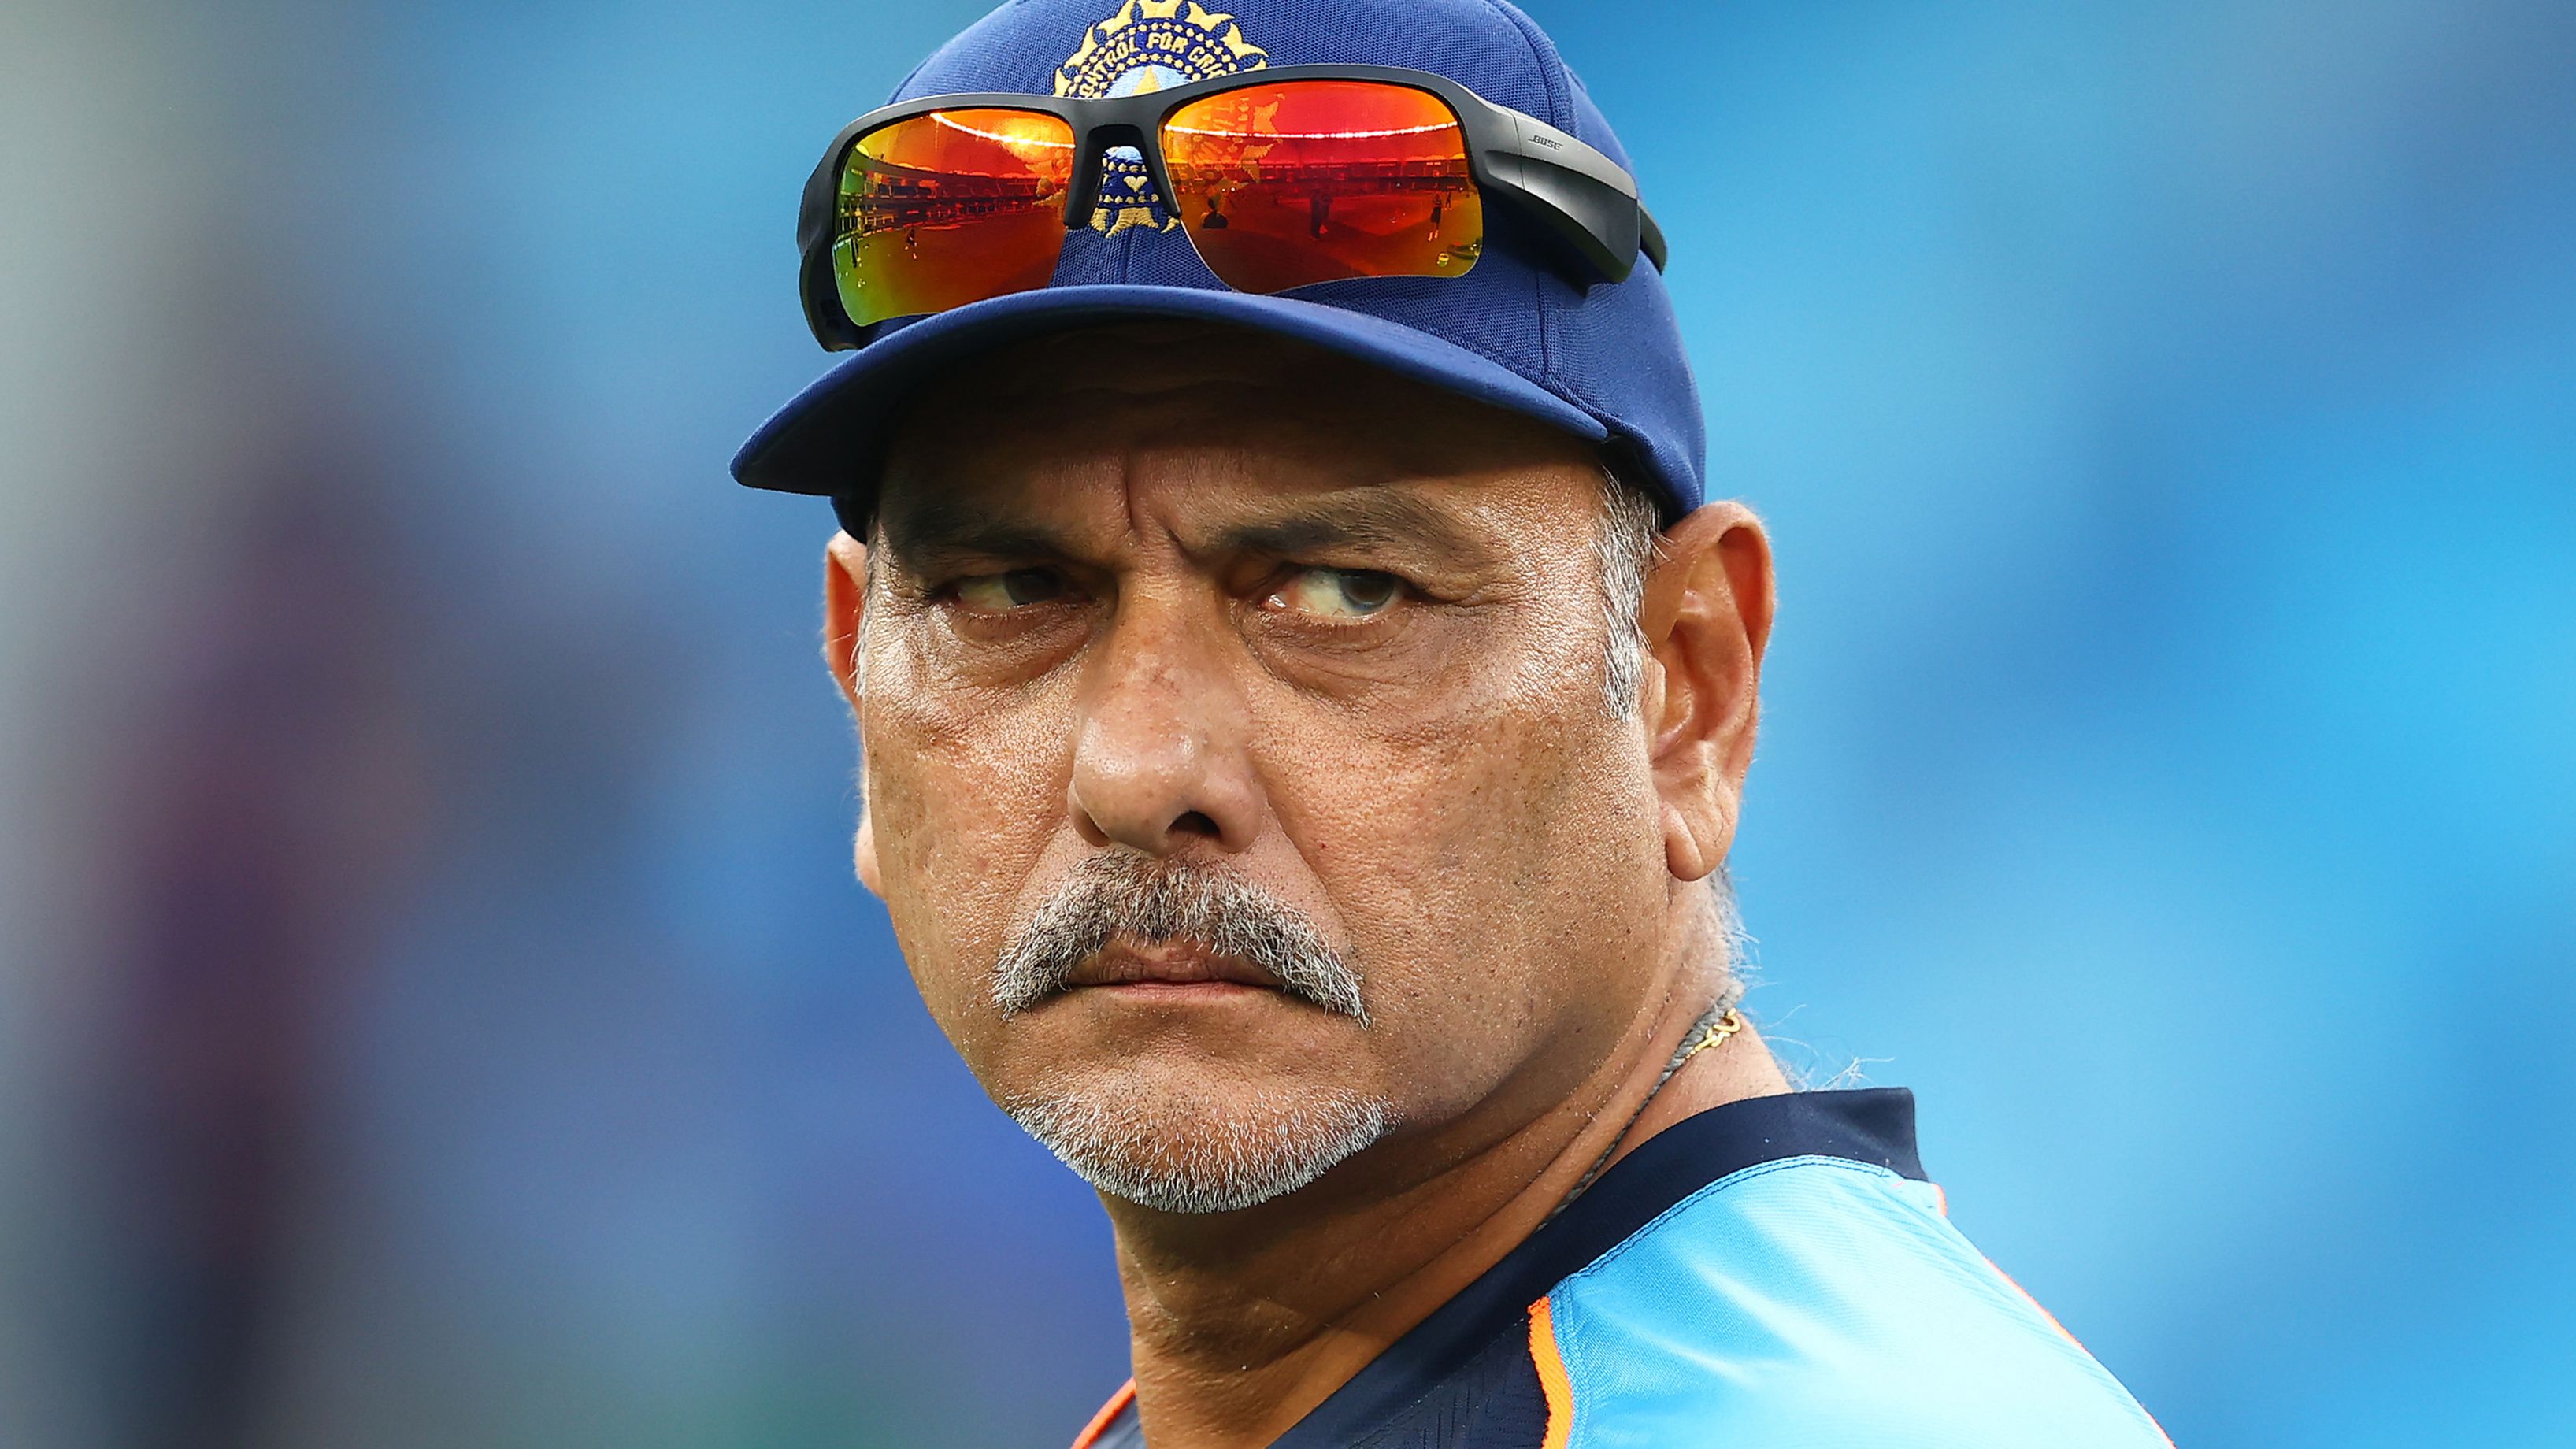 'So what?': Indian great Ravi Shastri hits out at Australian claims of pitch doctoring